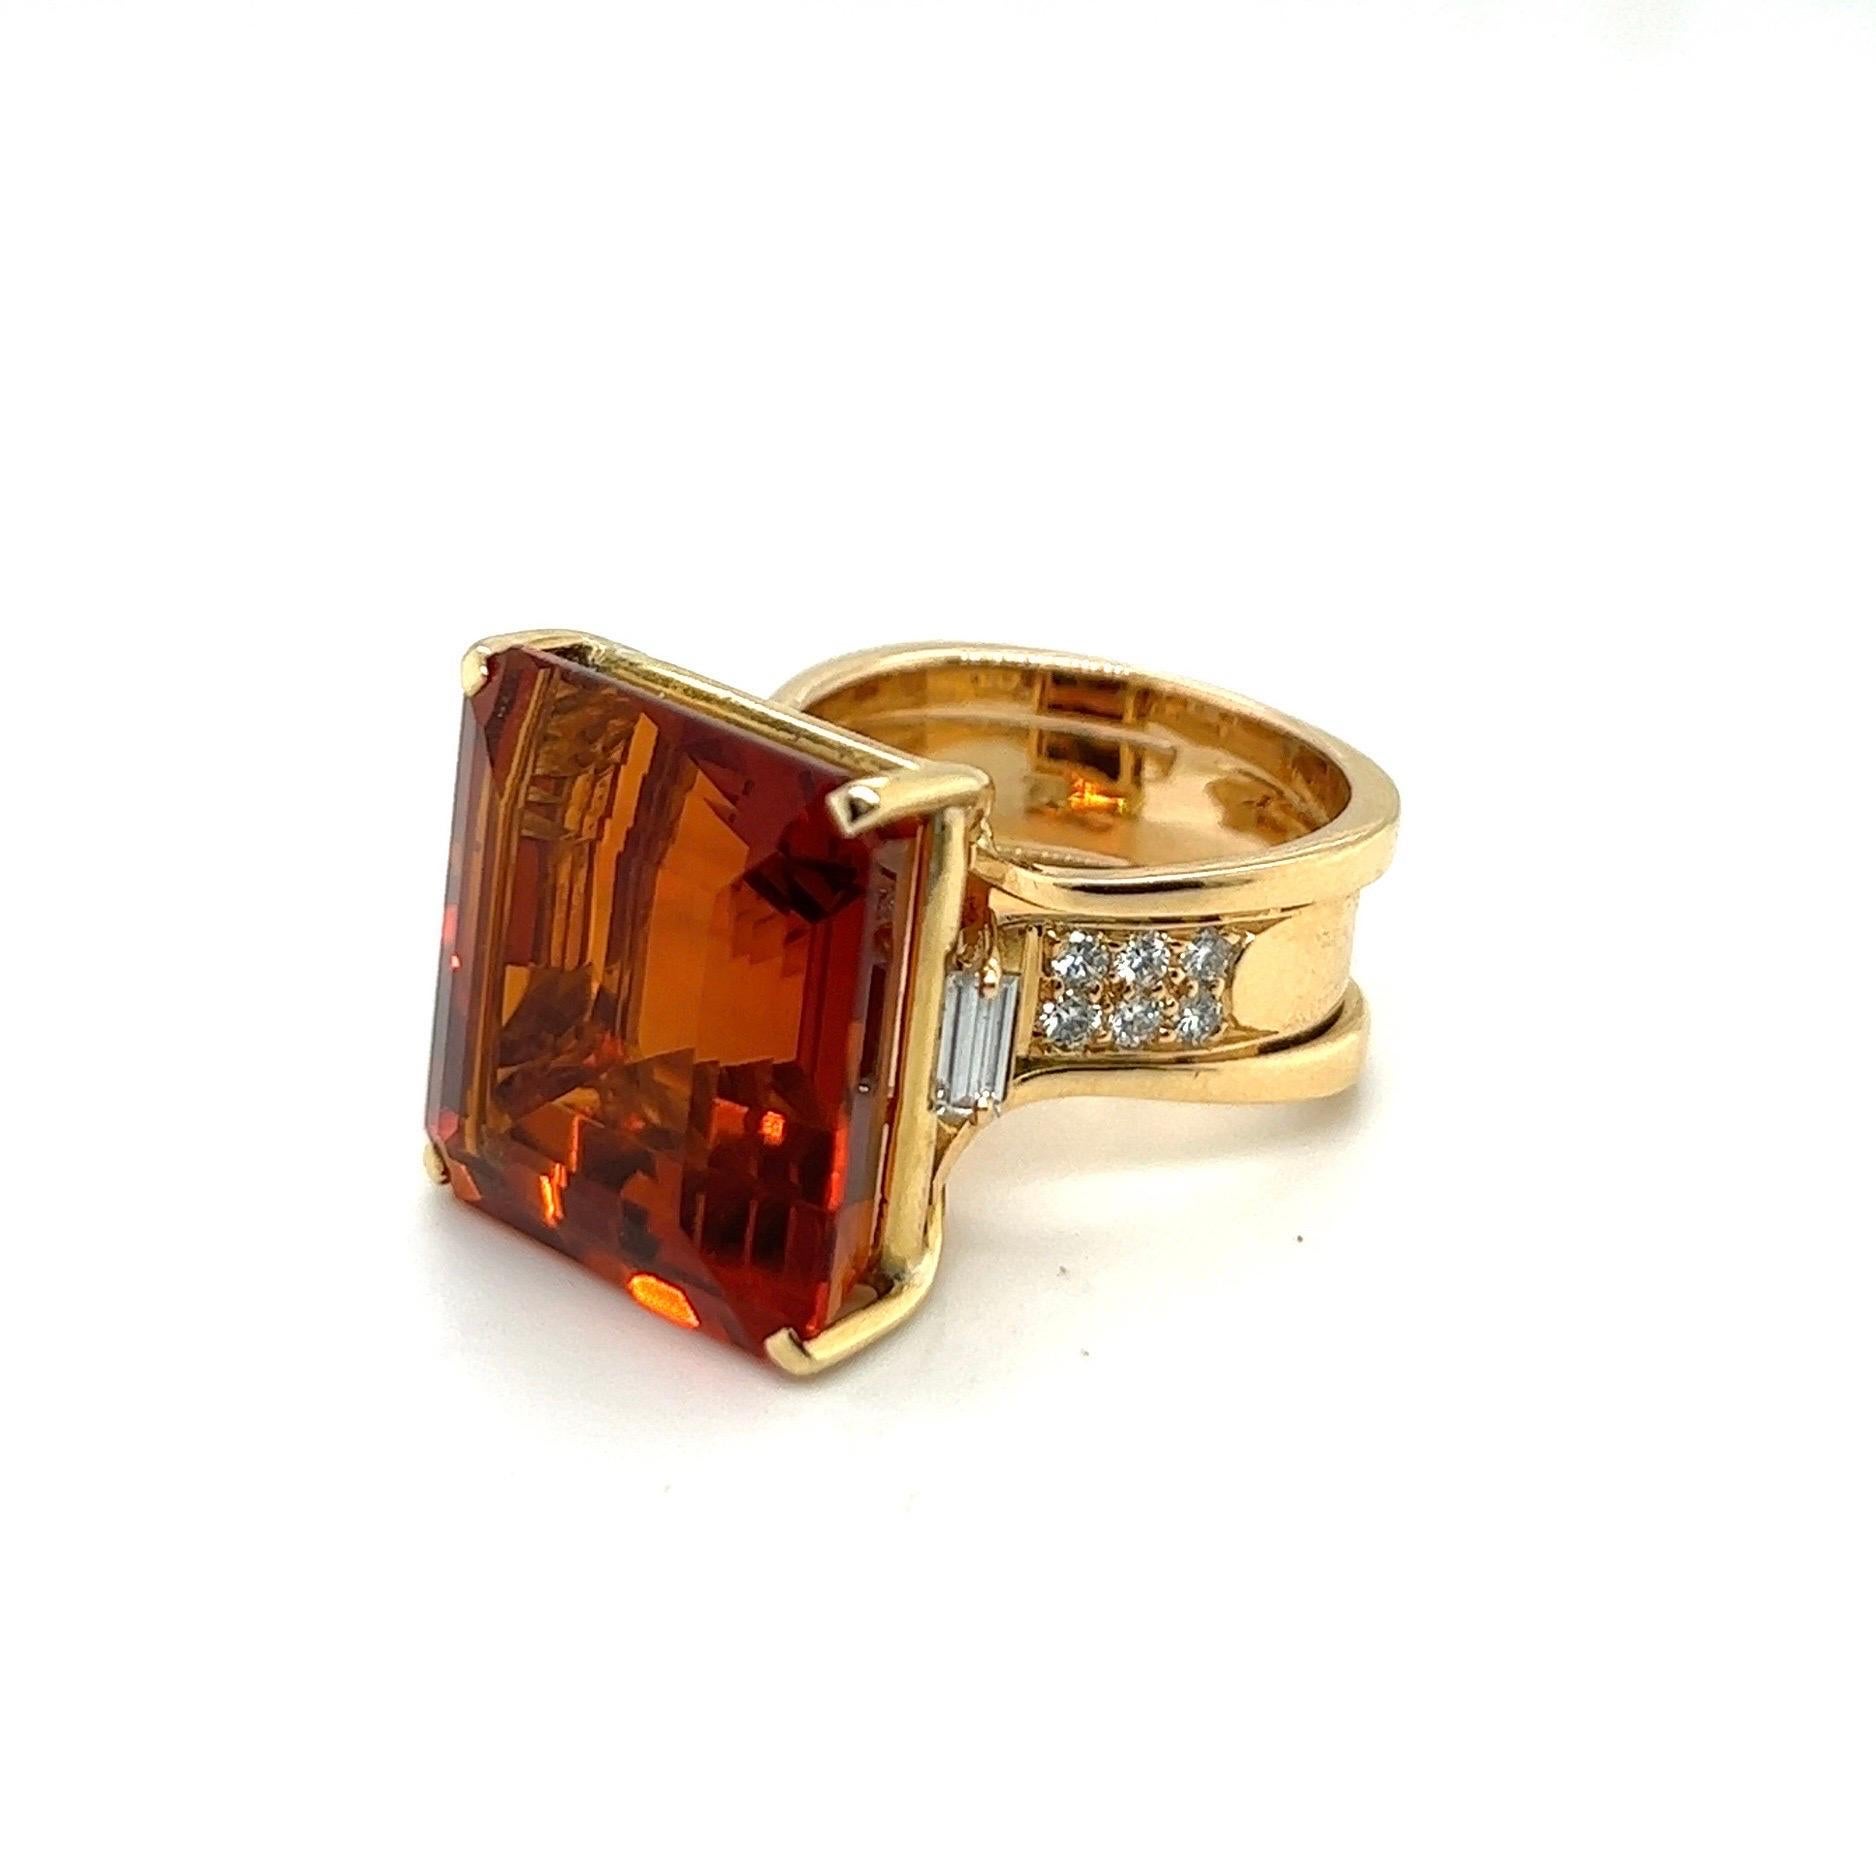 Modernist 18 Karat Yellow Gold Citrine and Diamod Cocktail Ring by Paul Binder, 1980s For Sale